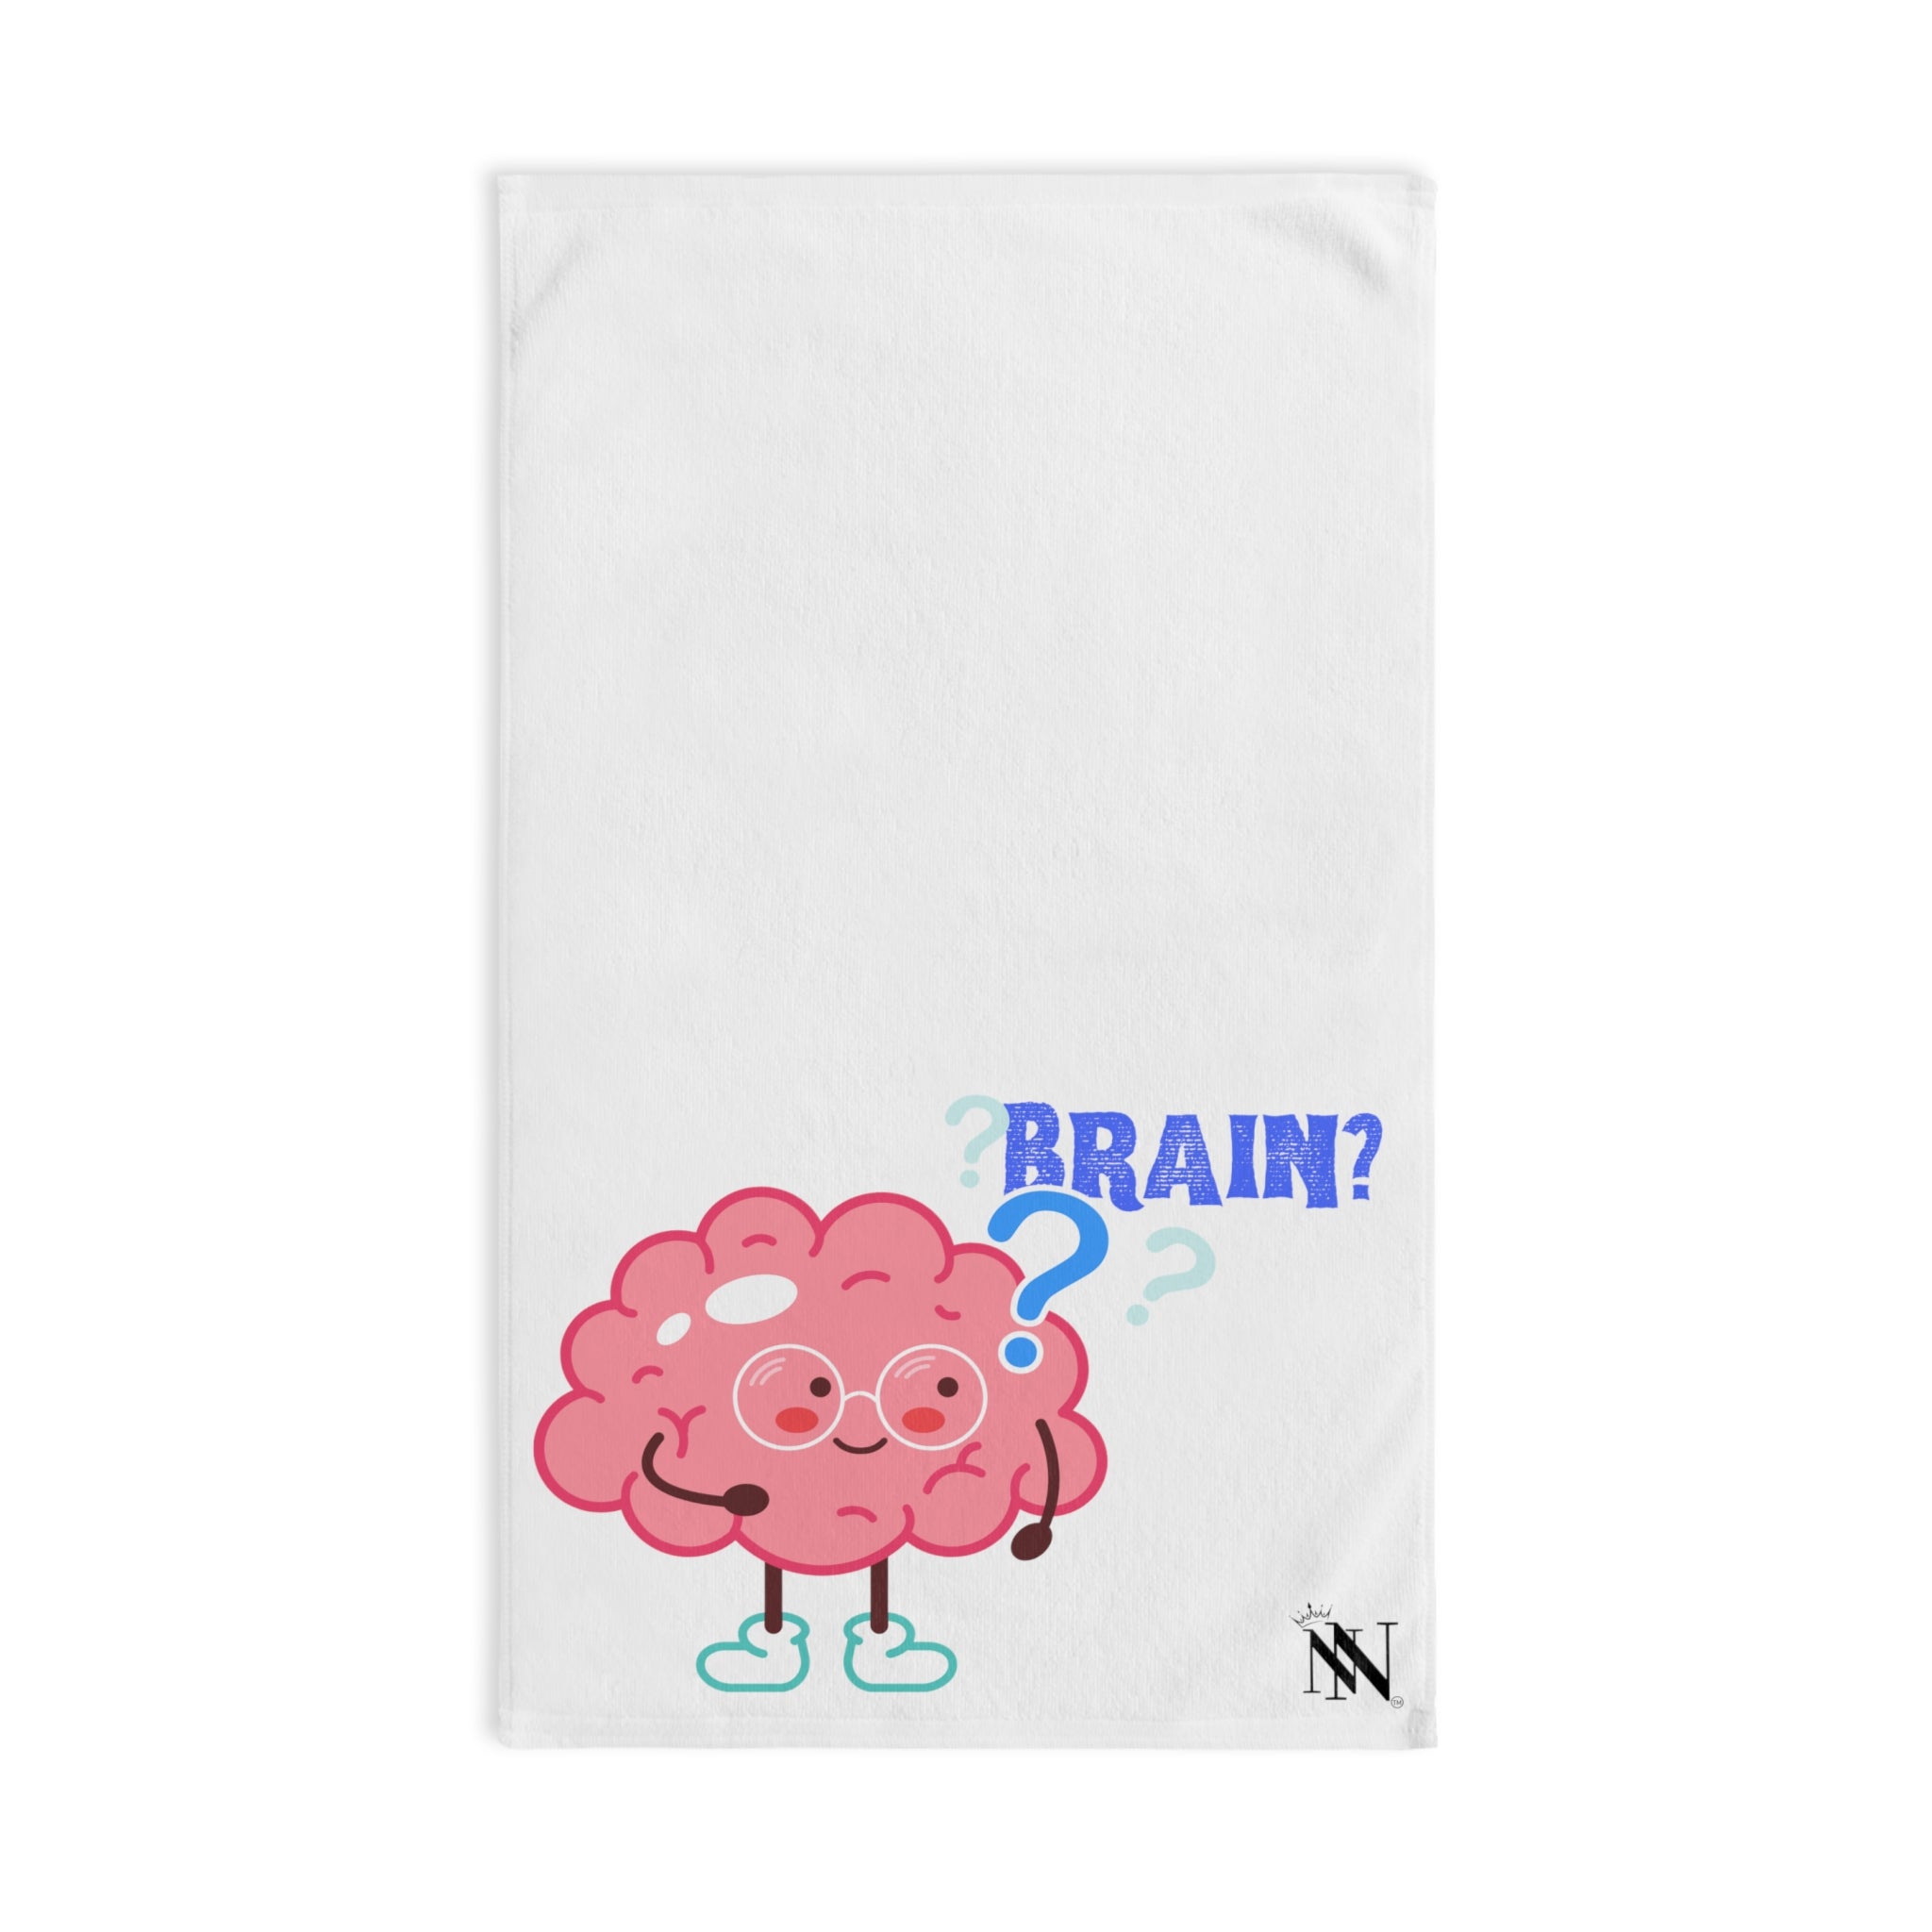 Brain Question Fun White | Funny Gifts for Men - Gifts for Him - Birthday Gifts for Men, Him, Her, Husband, Boyfriend, Girlfriend, New Couple Gifts, Fathers & Valentines Day Gifts, Christmas Gifts NECTAR NAPKINS